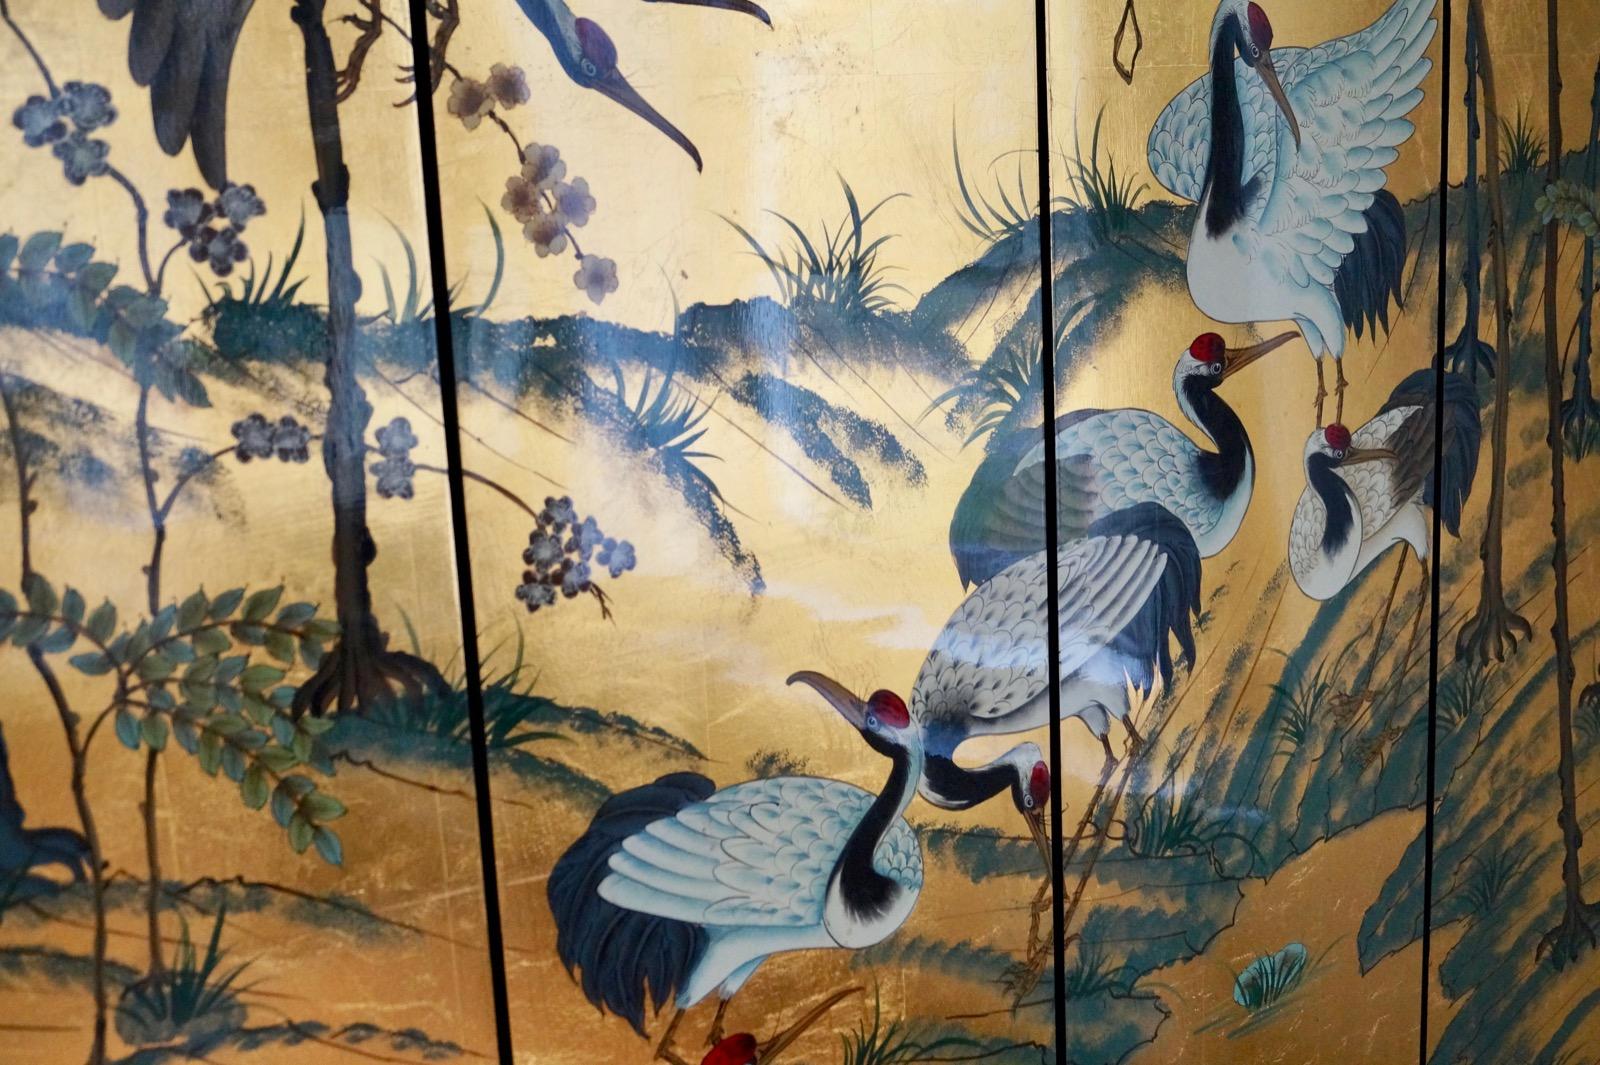 Four-panel screen/room divider crane birds
France, Art Deco period.

With generous applied gold leaf and gloss lacquered finish.
Extremely decorative piece of applied art. Beautifully detailed and hand painted.
Good condition. Some minor